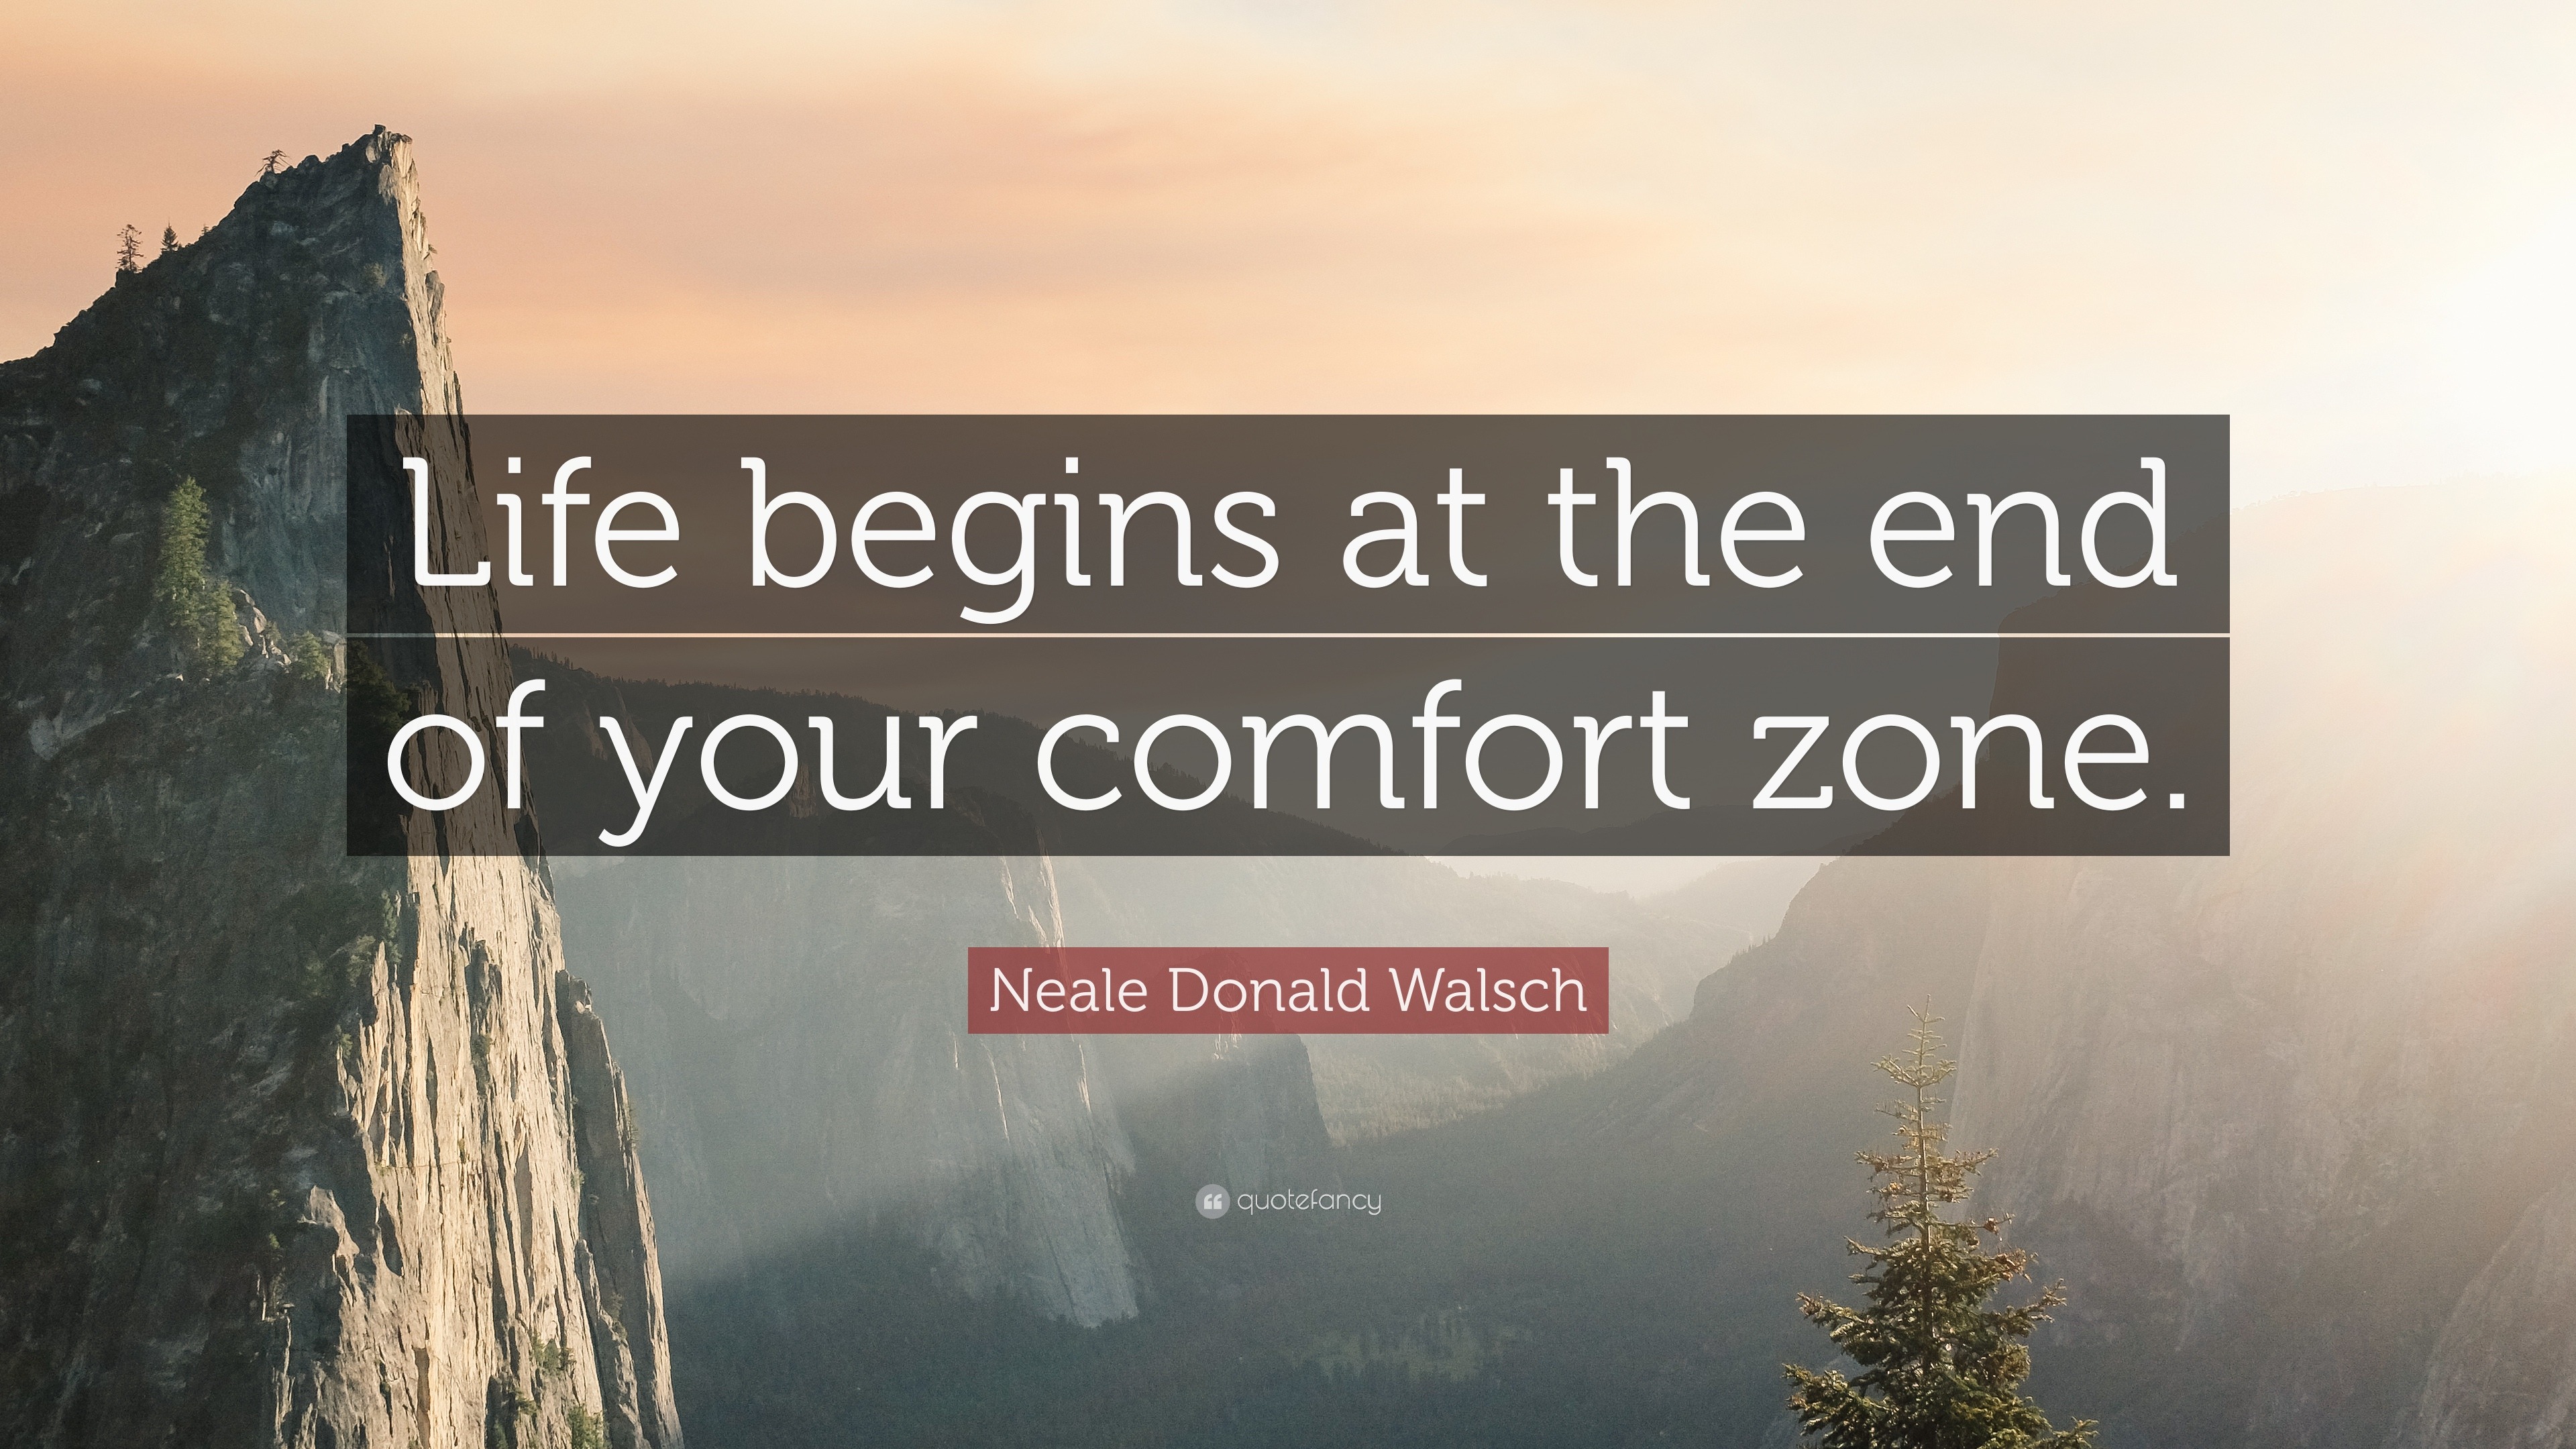 Neale Donald Walsch Quote: “Life begins at the end of your comfort zone.”